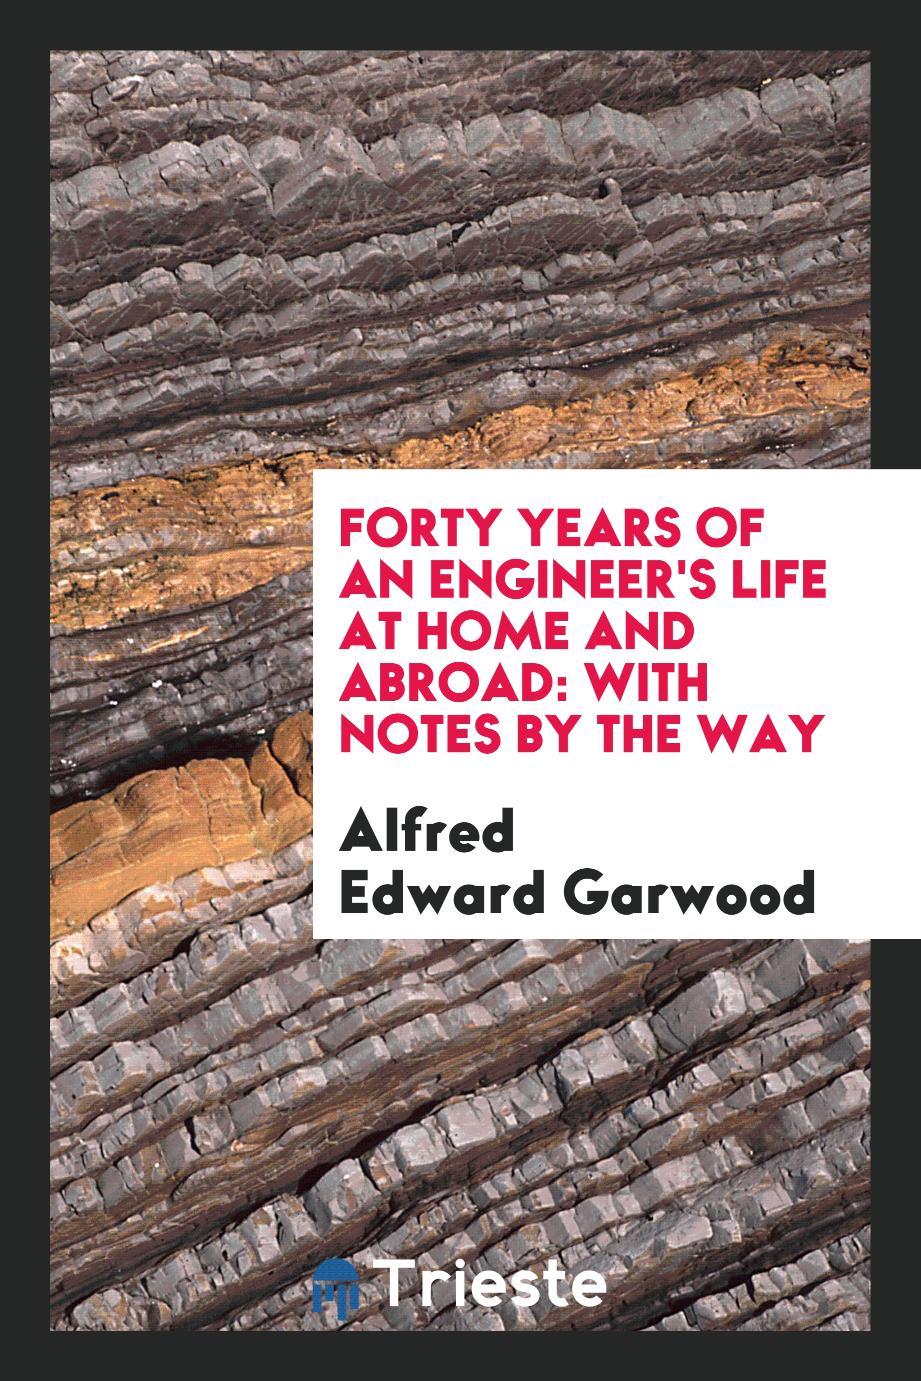 Forty years of an engineer's life at home and abroad: with notes by the way